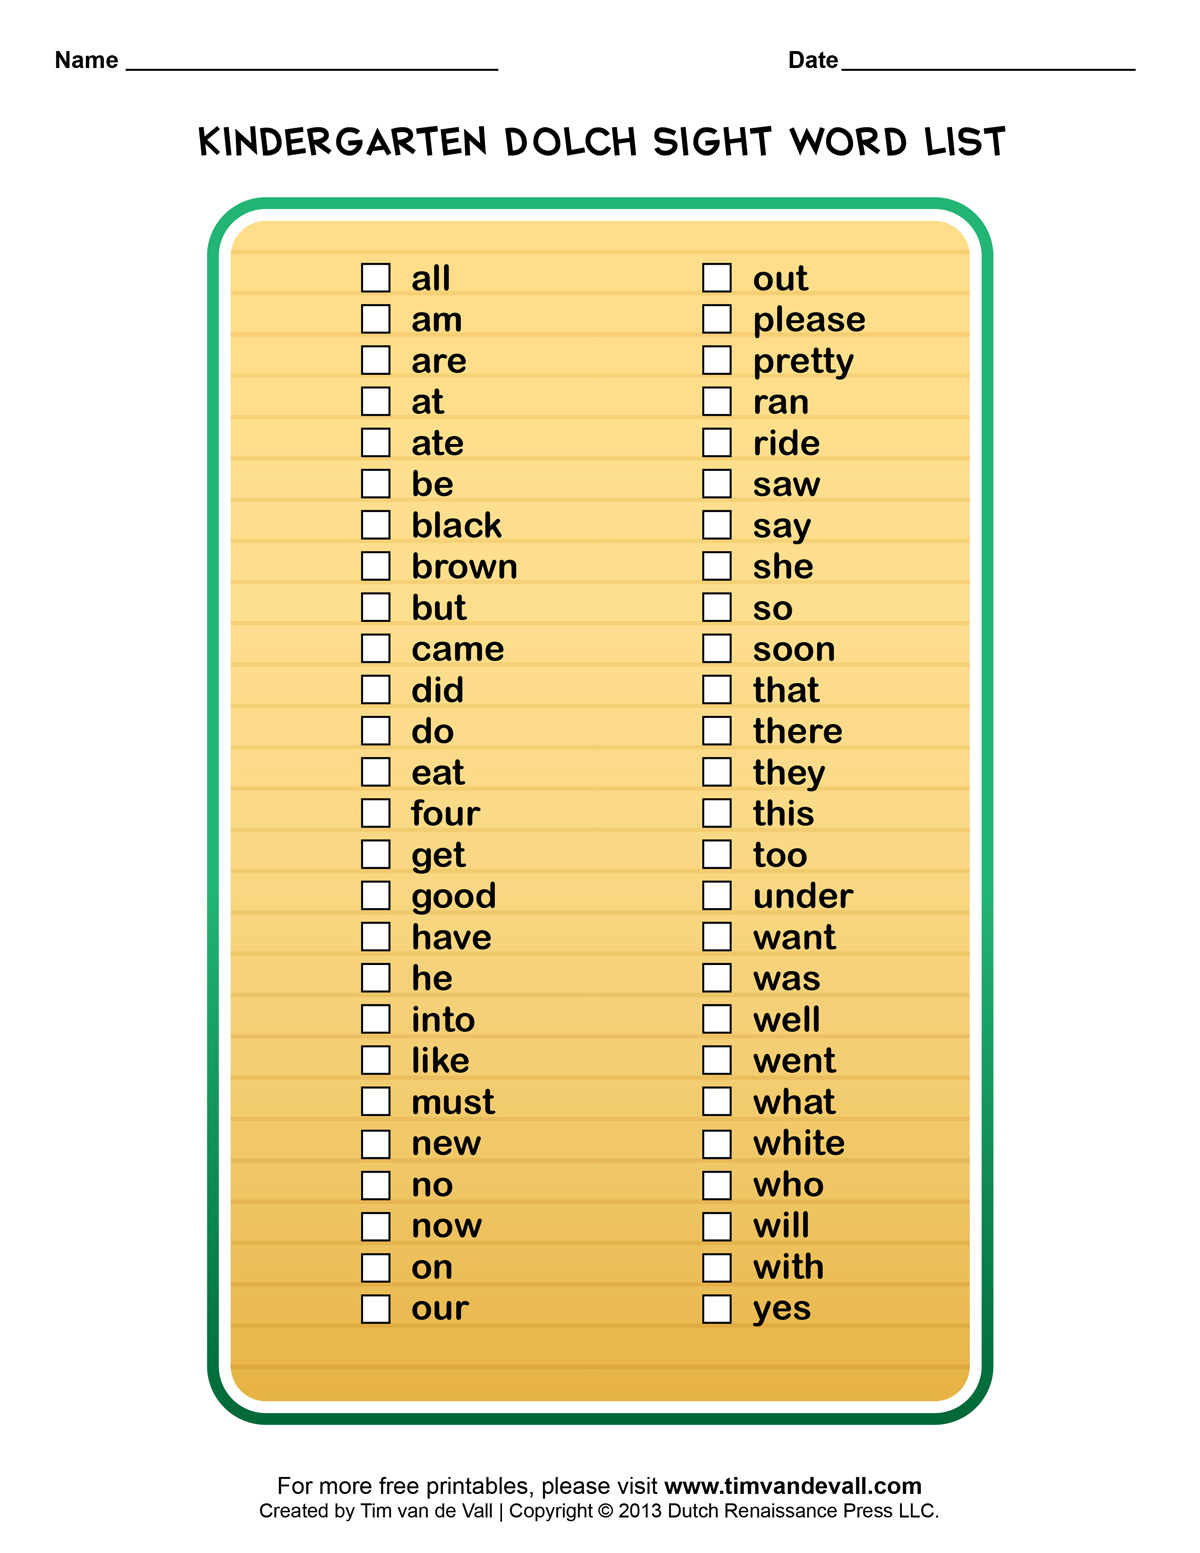 dolch-words-printable-list